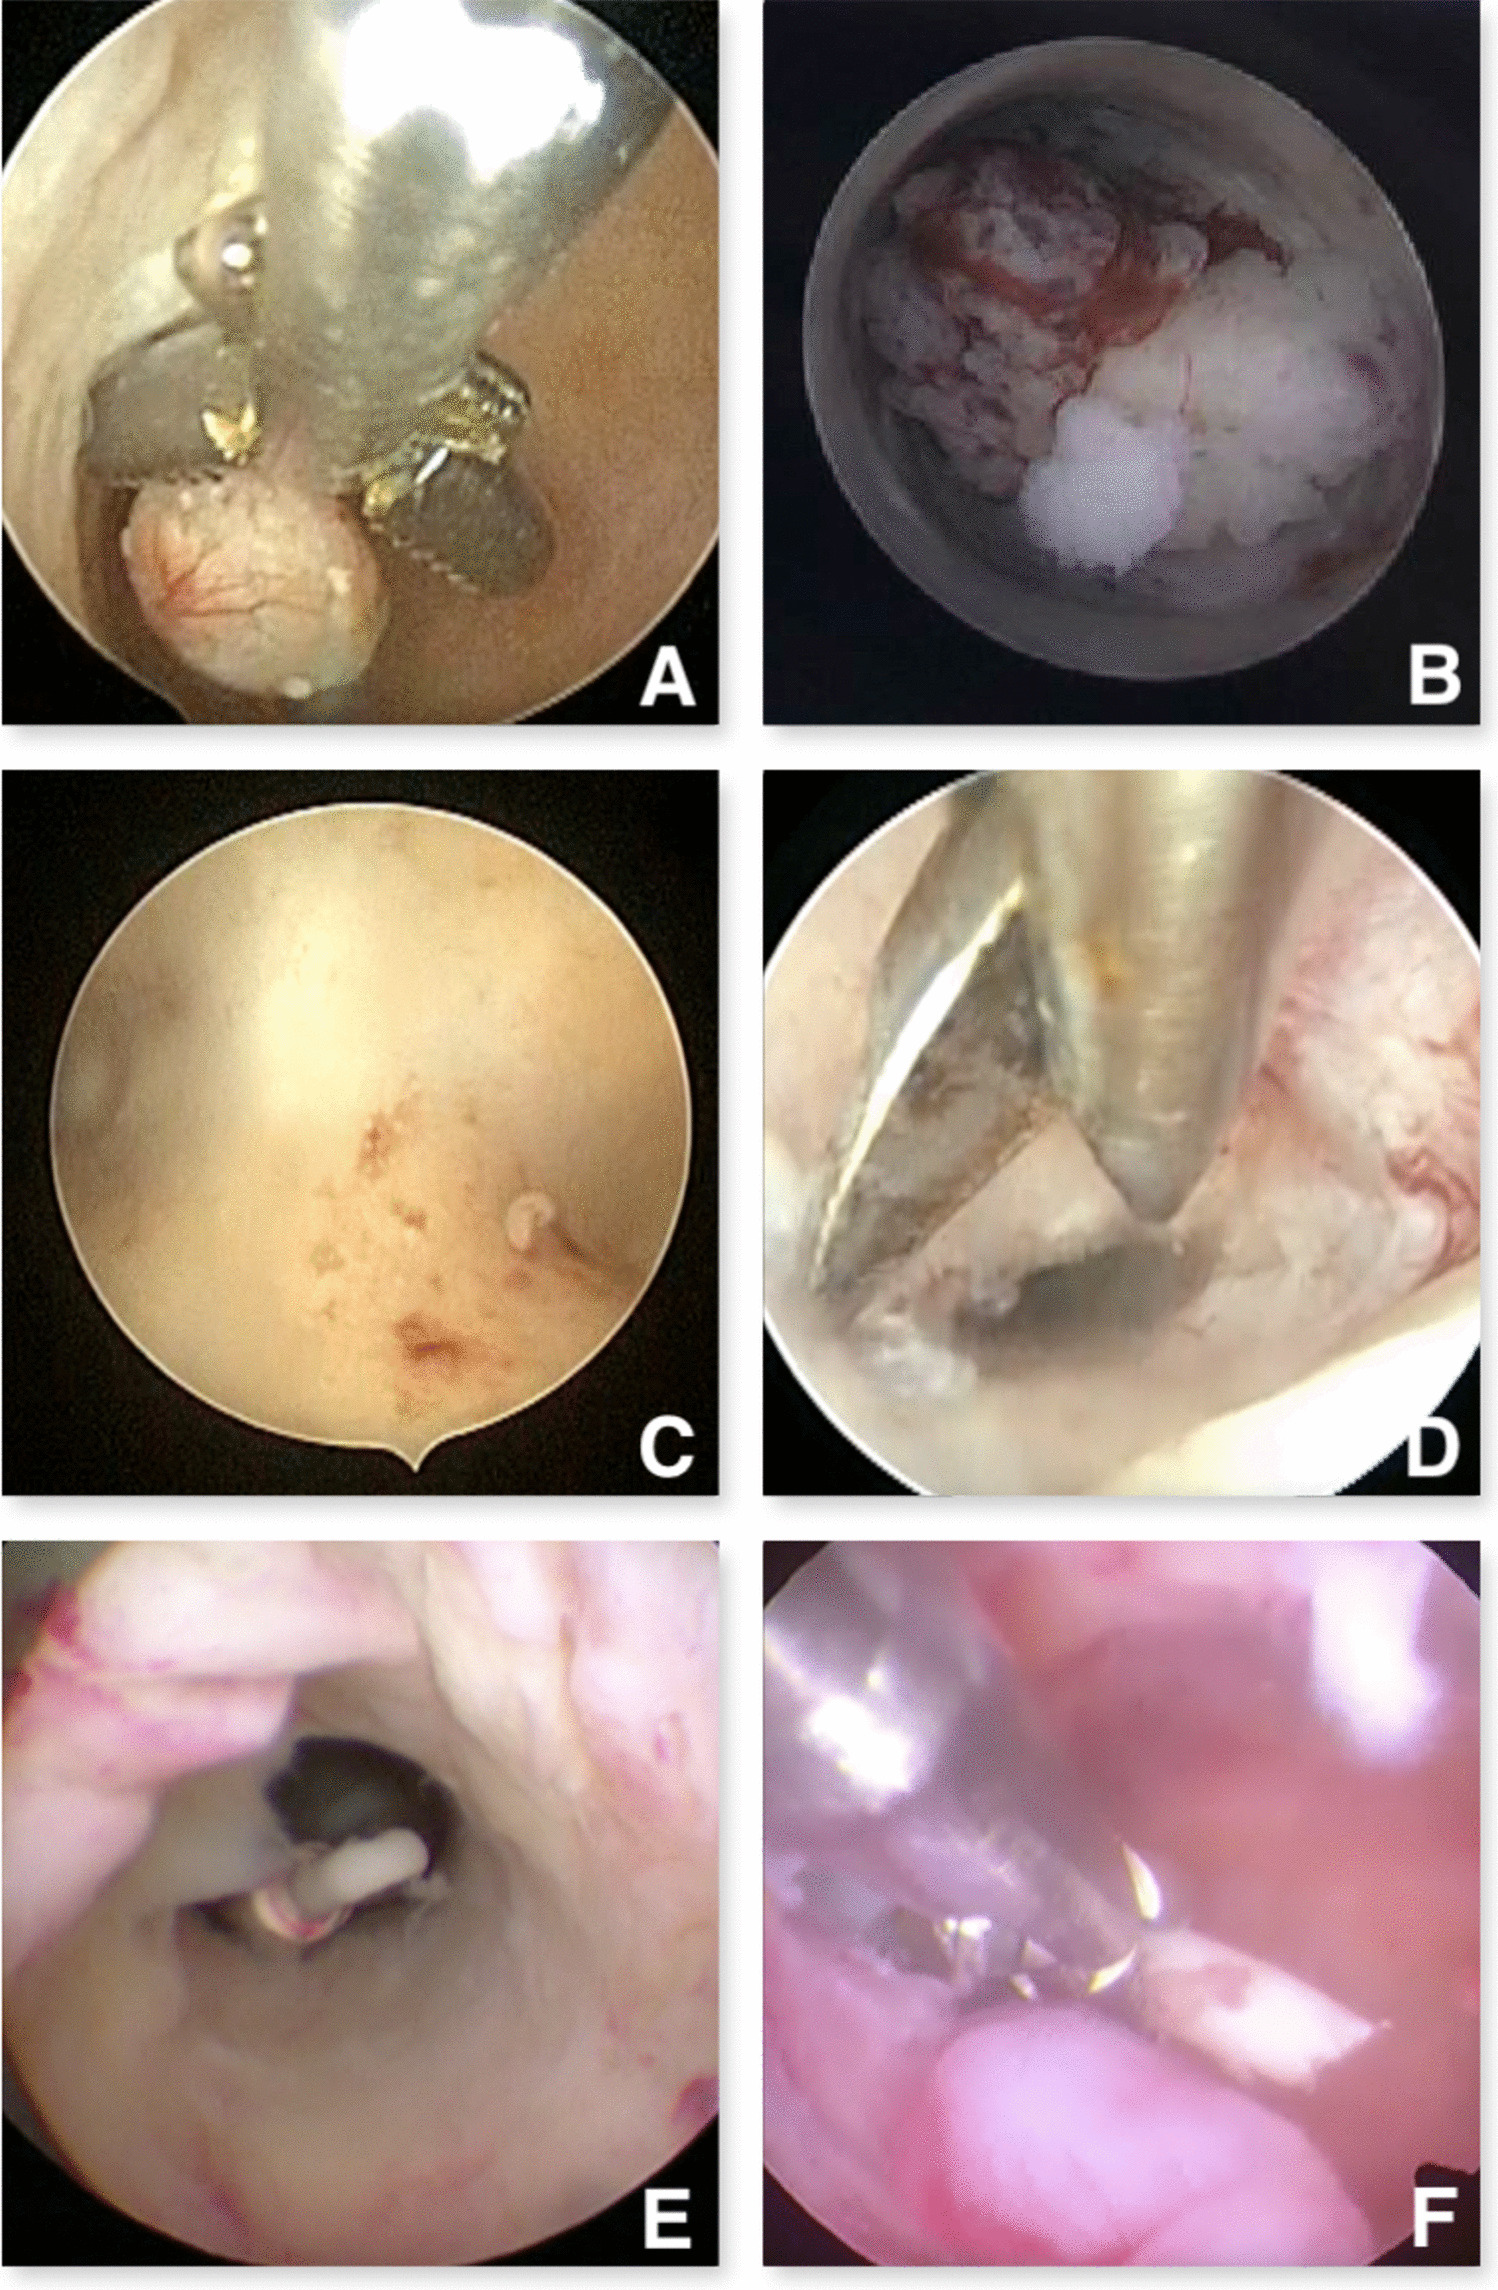 An Overview of Office Hysteroscopy